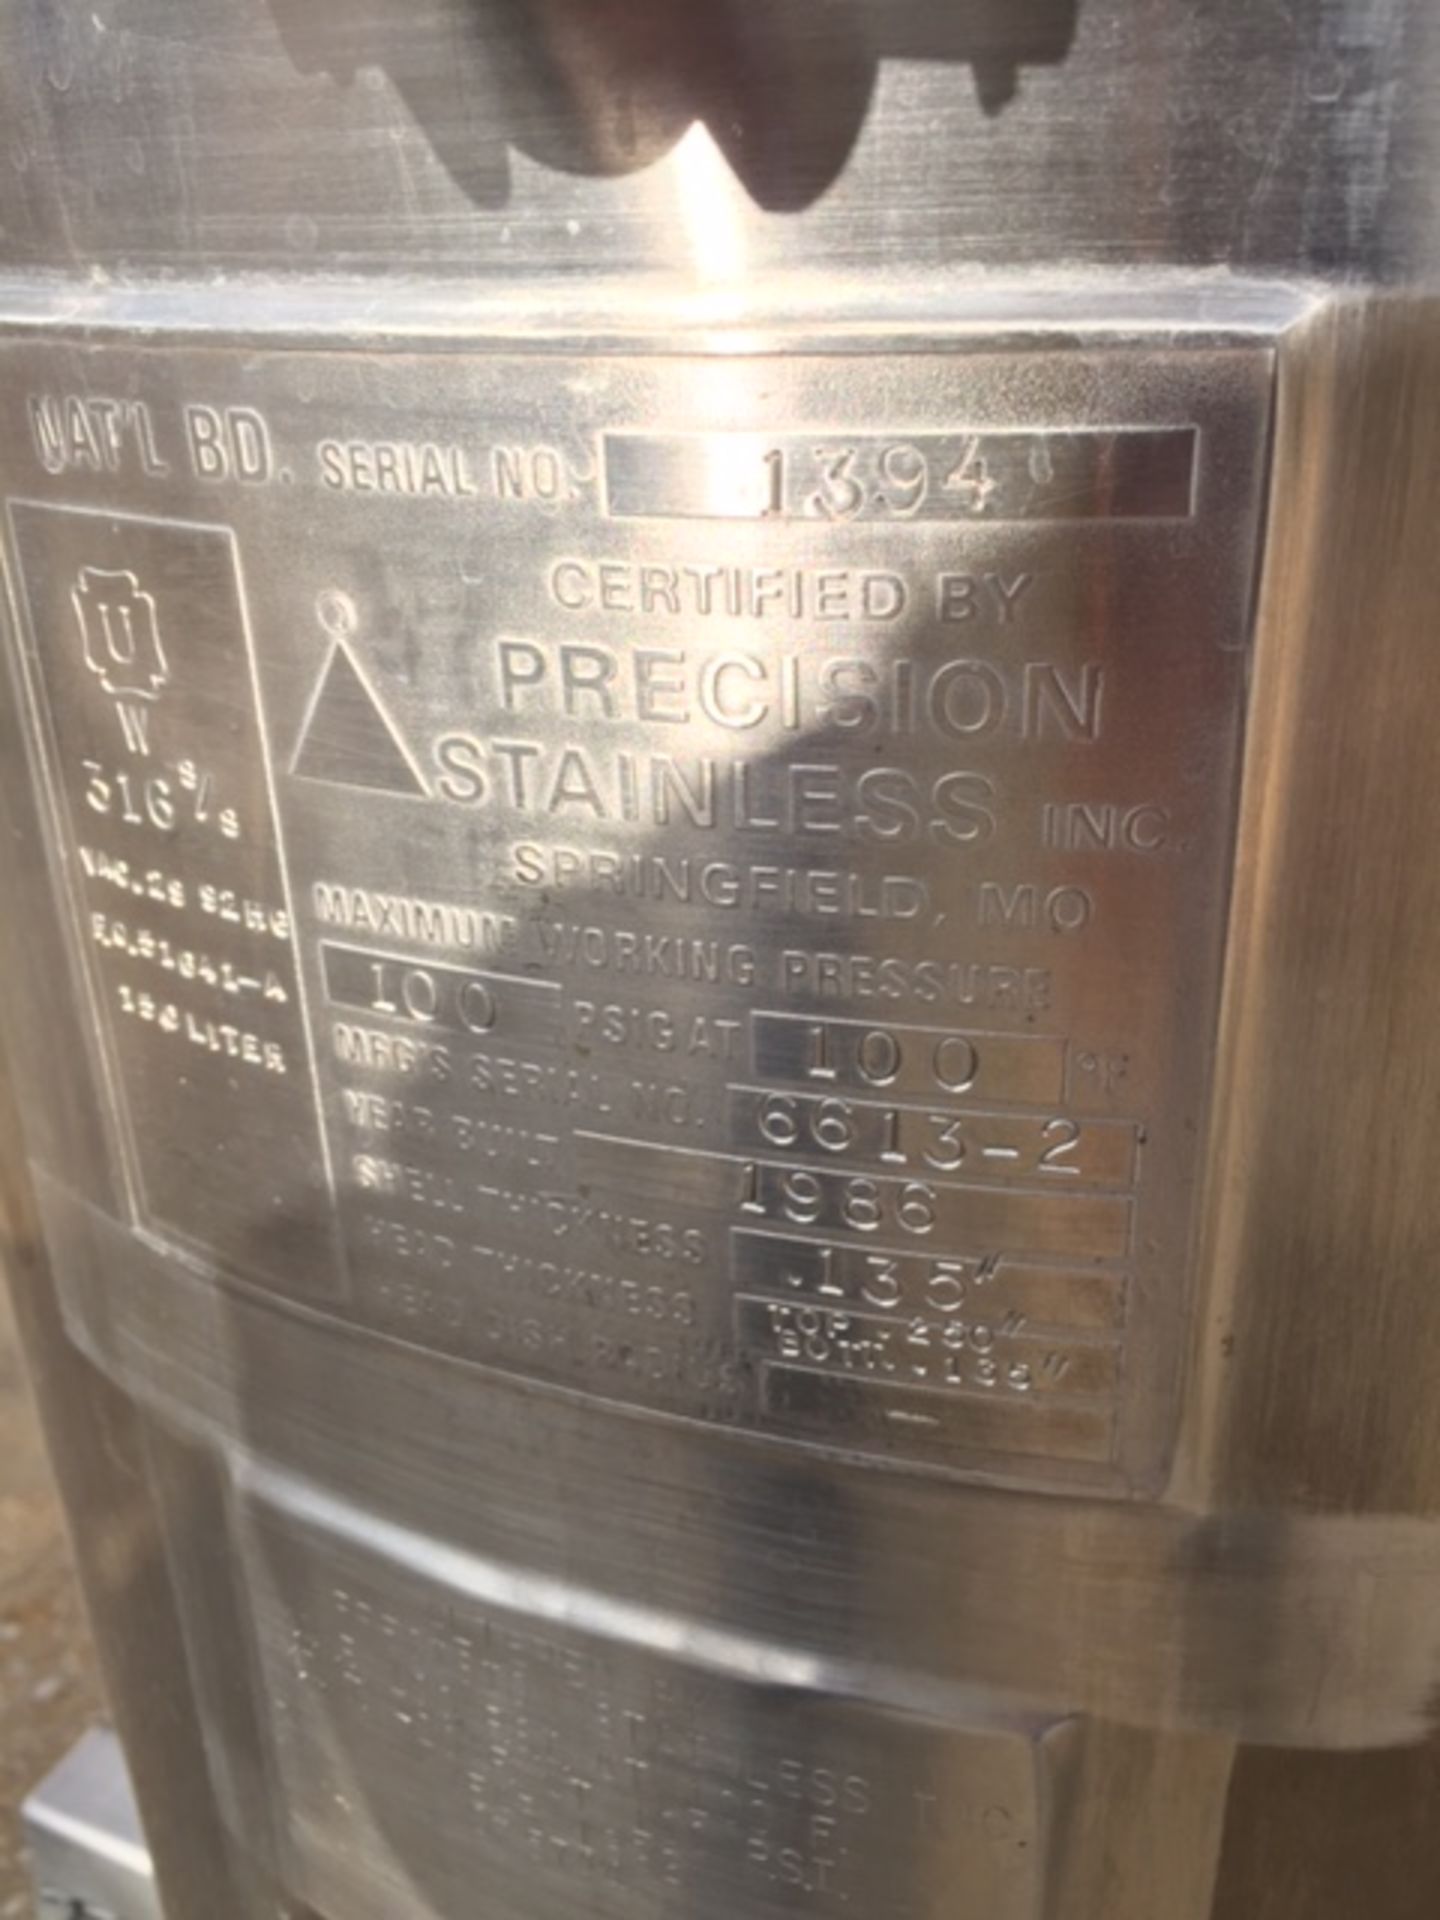 Pressure Tank, 150 Liter, 316 SS, 100 PSIG at 100 Deg. F, Certified by Precision Stainless Inc. - Image 3 of 6